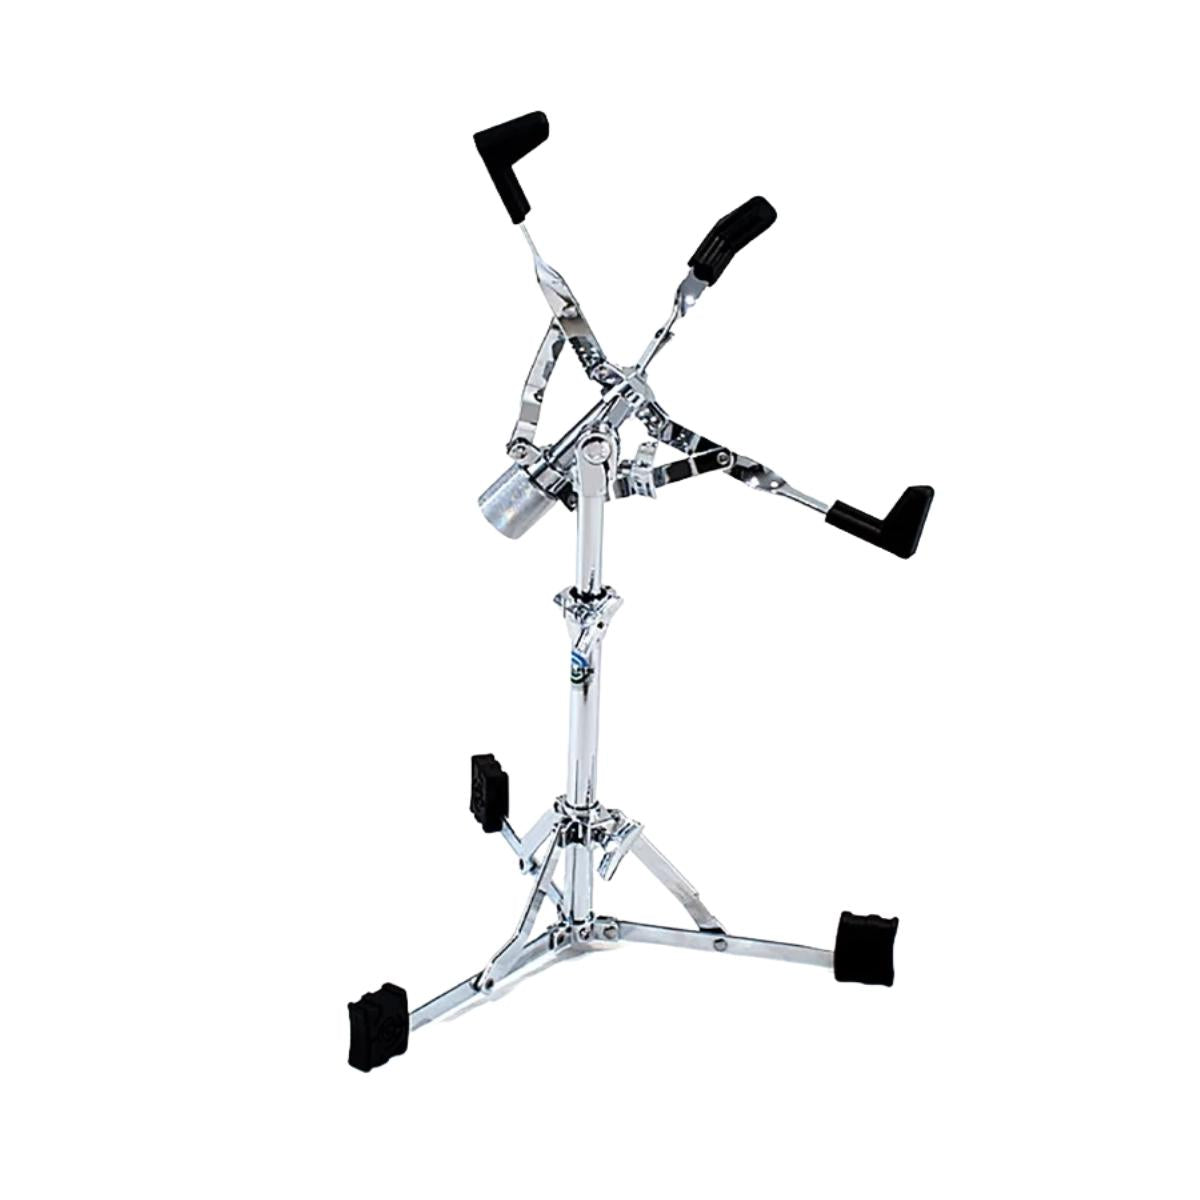 Ludwig LAC21SS Atlas Classic Flat Base Snare Stand with Acculite Sustain Feet, Gearless Tilter, Low-Contact Basket Grips for Drums